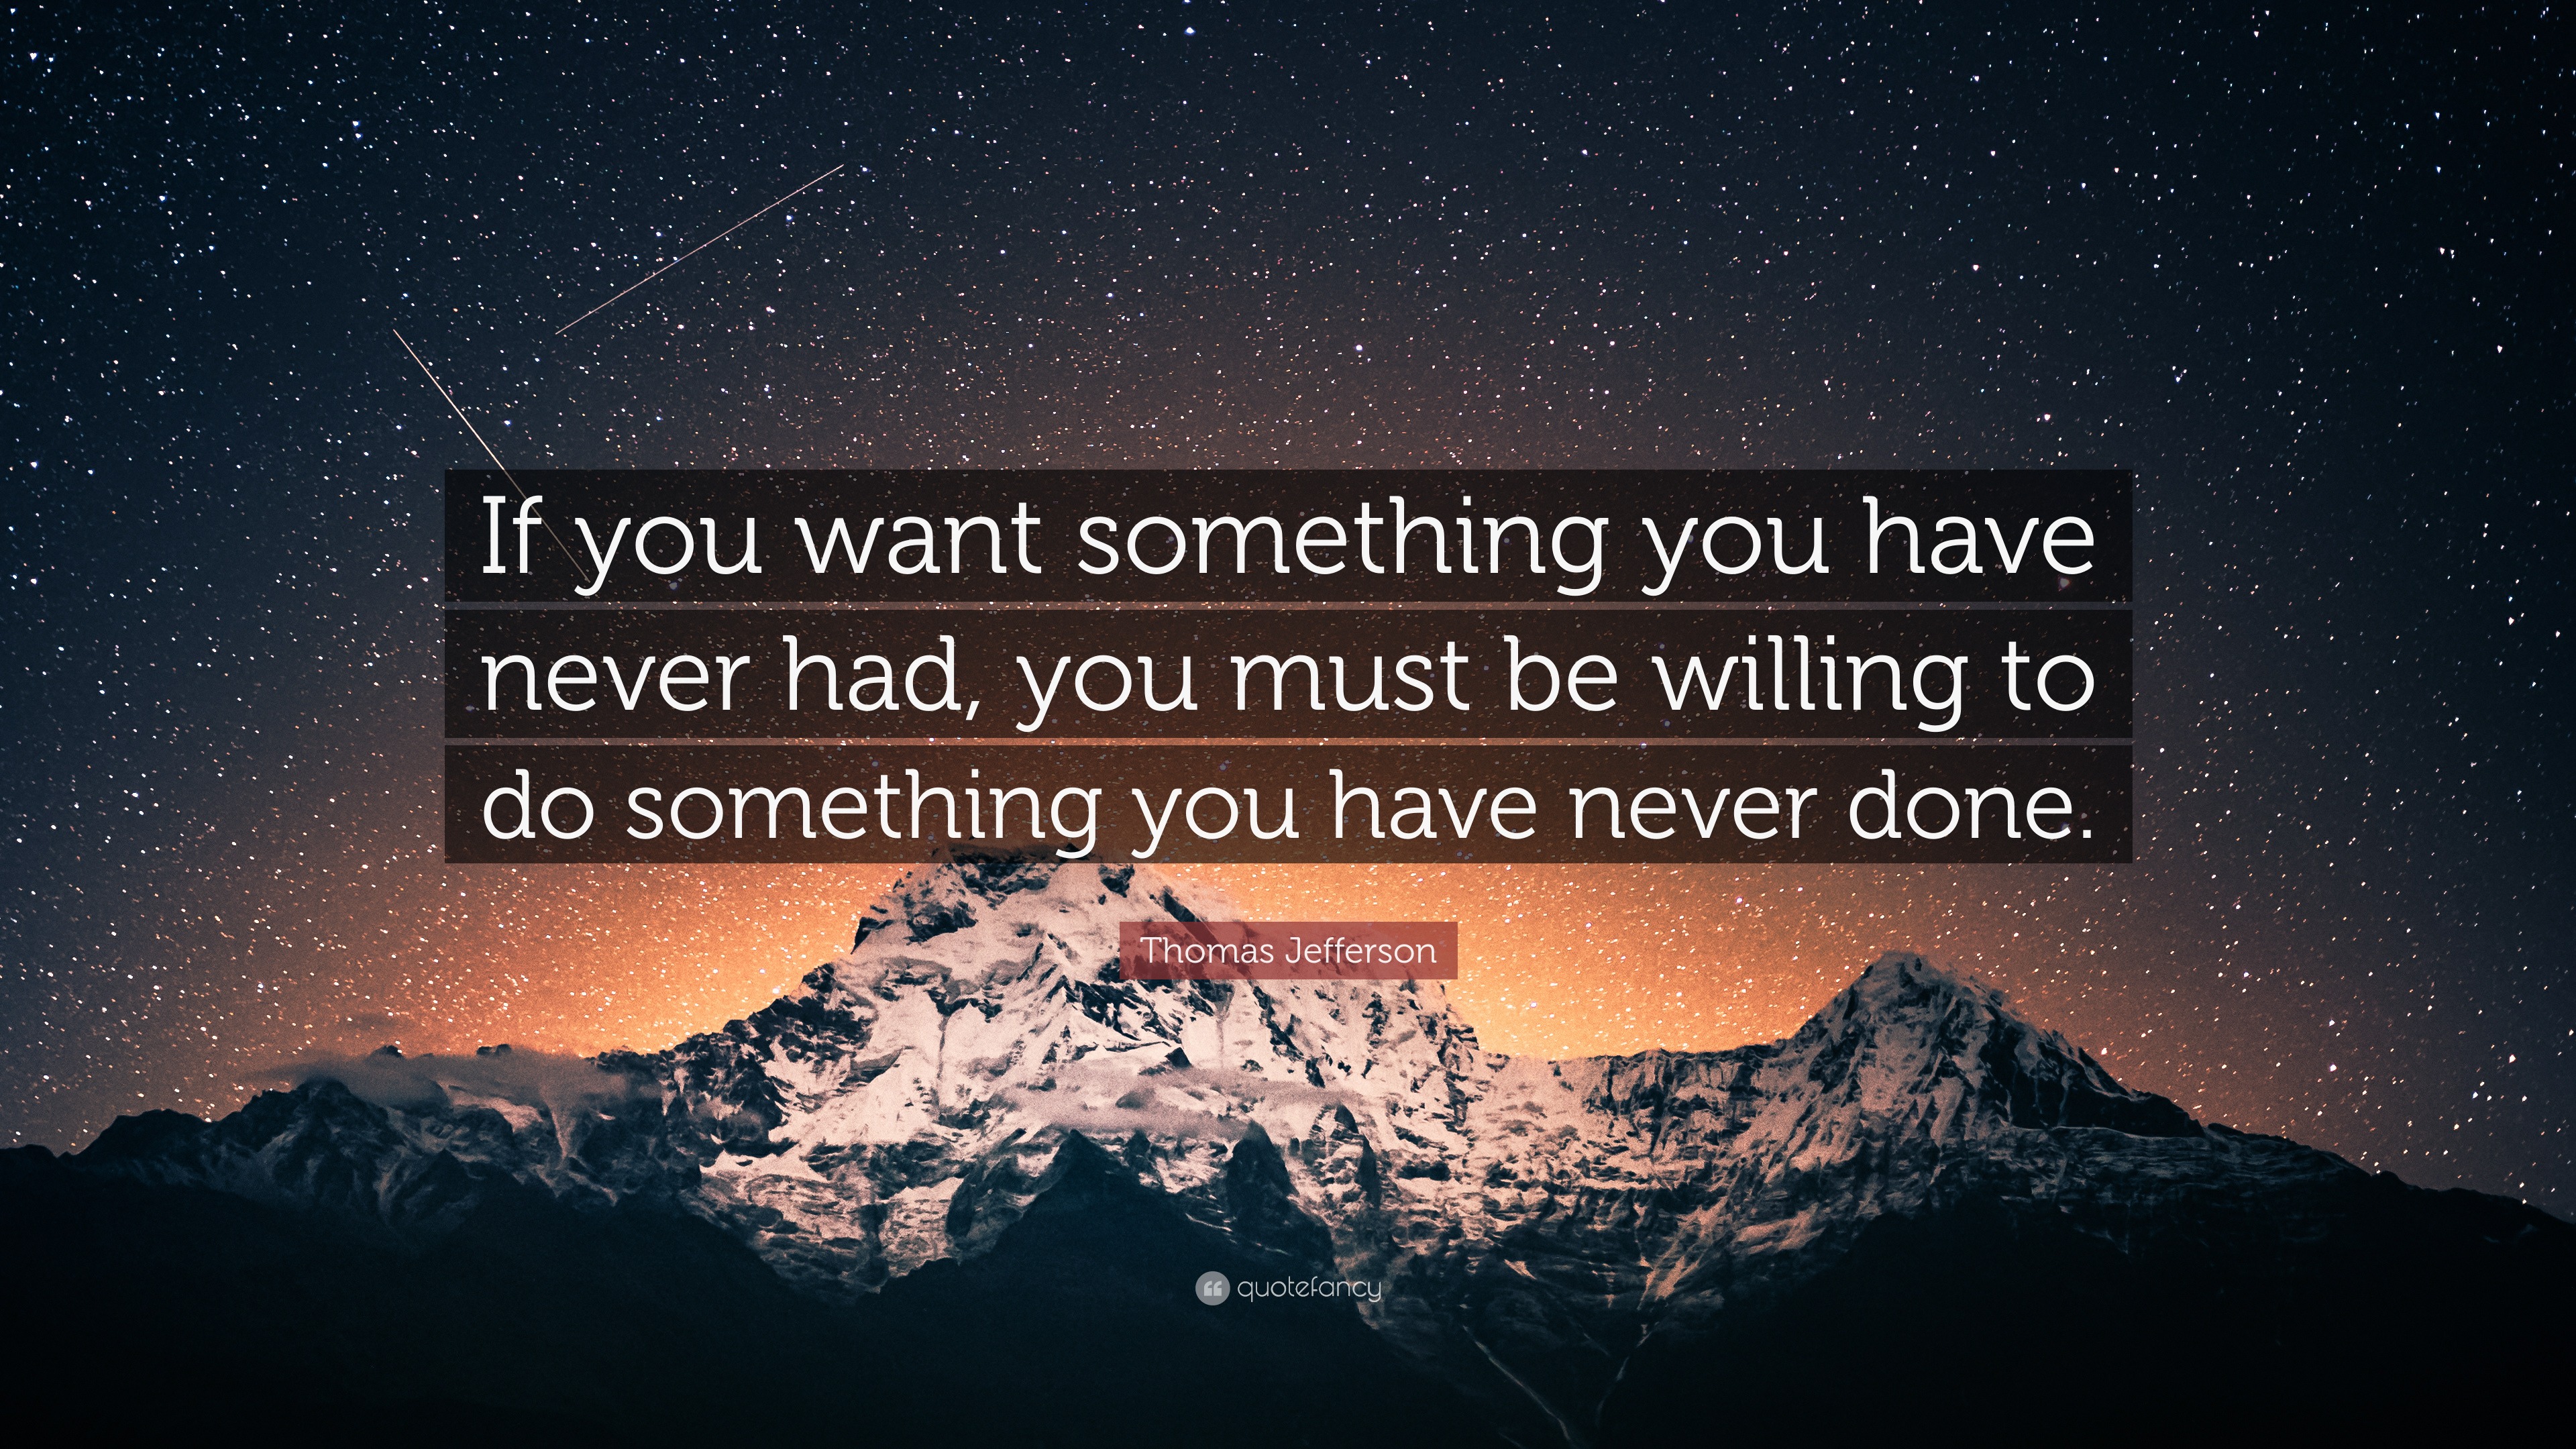 Thomas Jefferson Quote: “If you want something you have never had, you must  be willing to